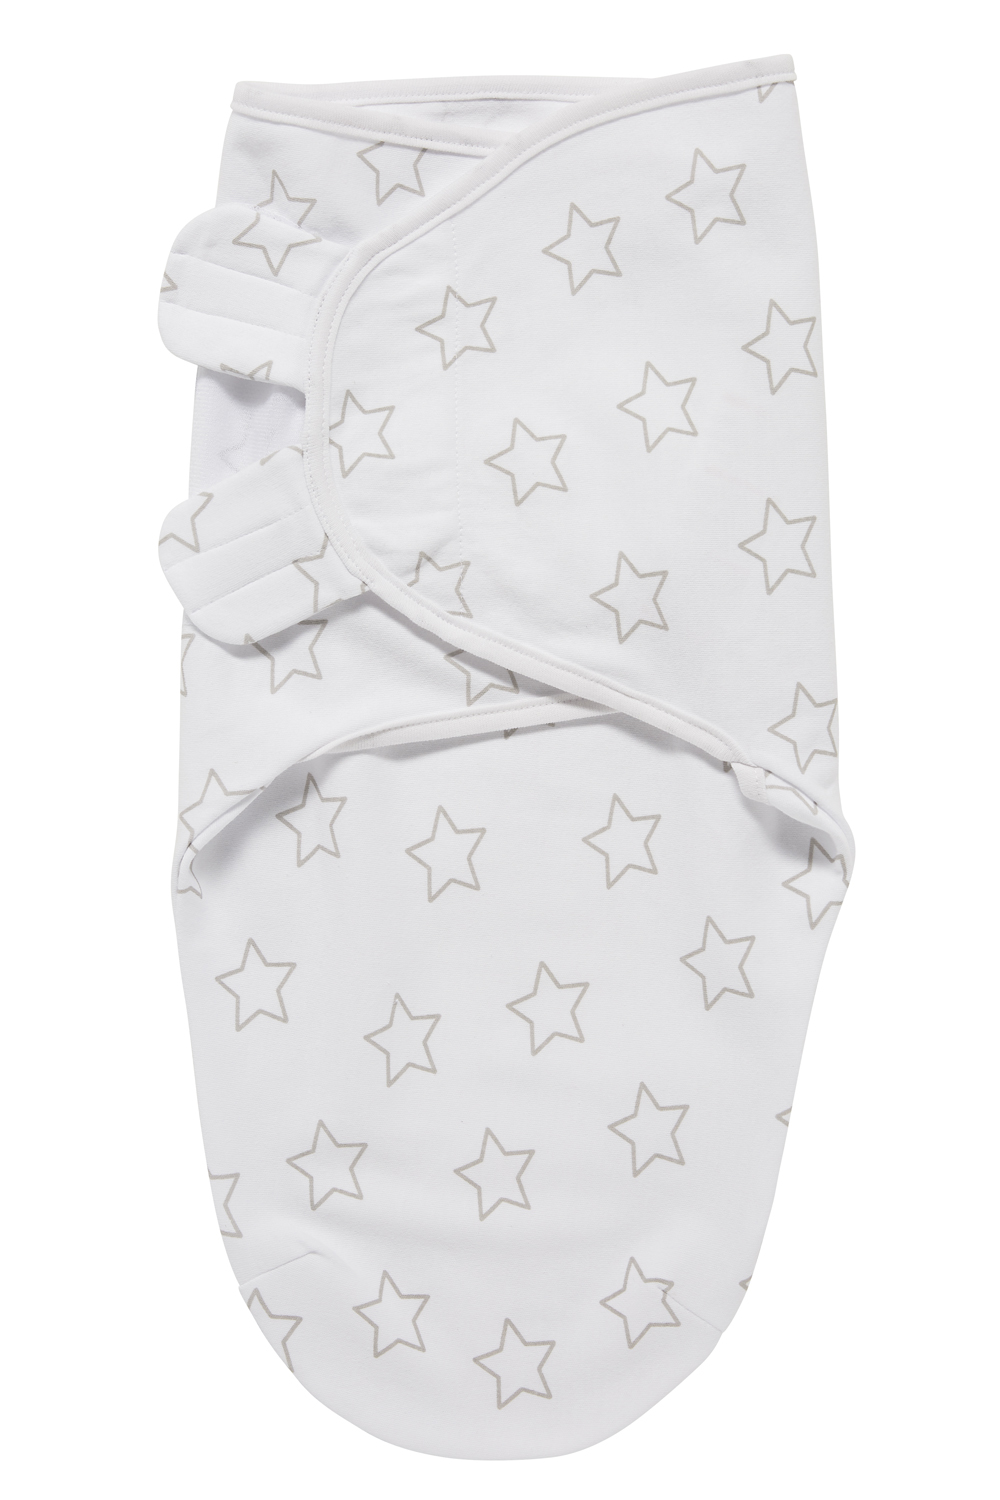 Swaddle Stars - grey - 0-3 Months